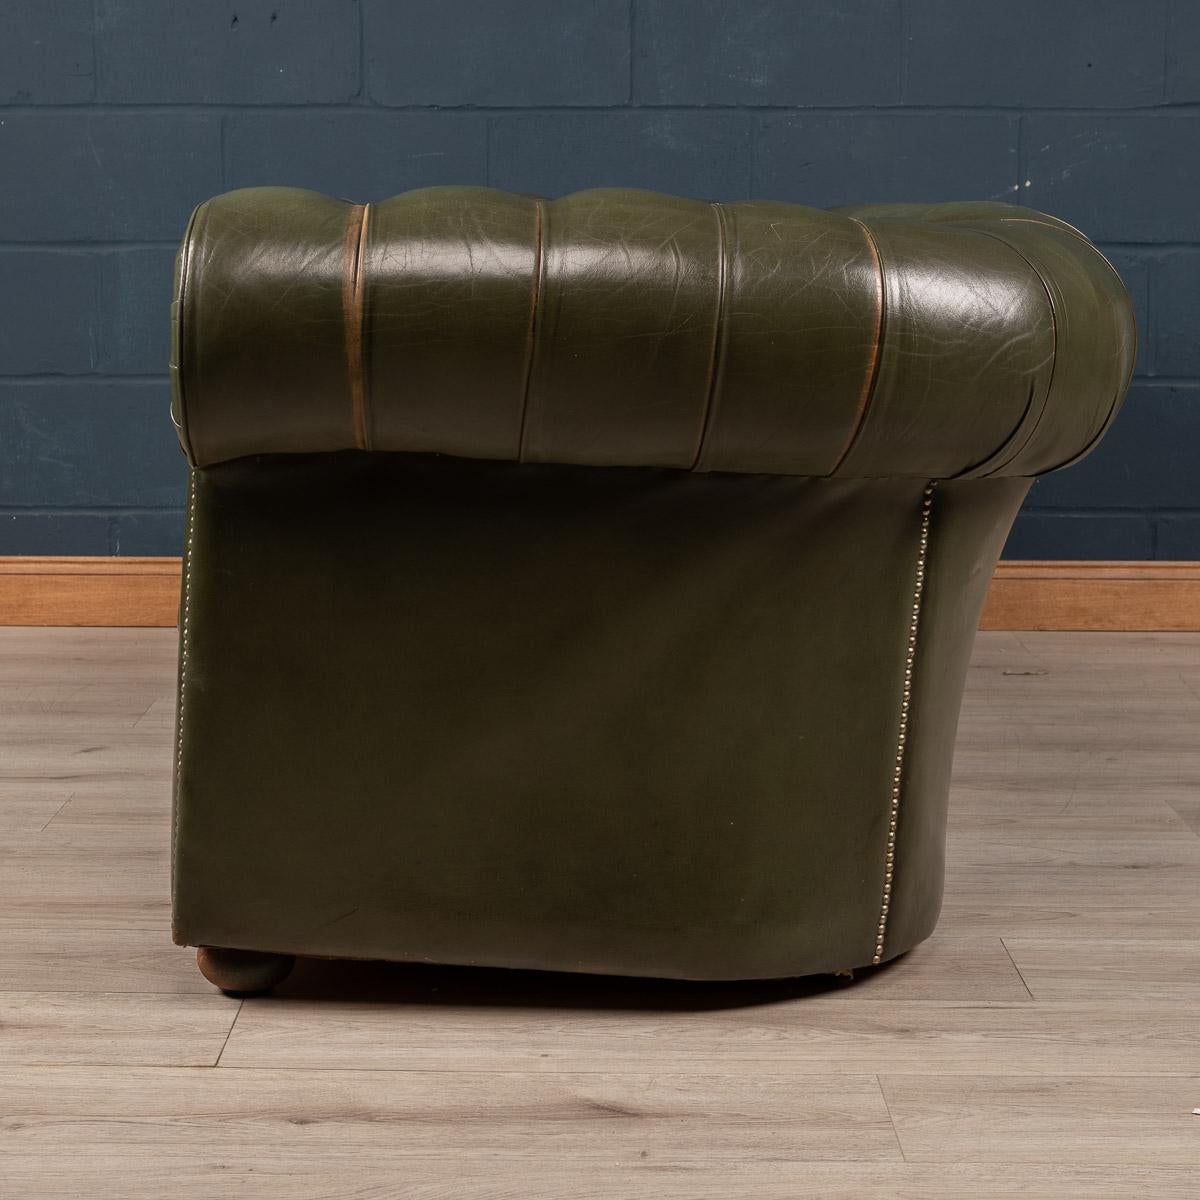 Superb mid 20th century green leather chesterfield sofa. One of the most elegant models with button down seating, this is a fashionable item of furniture capable of uplifting the interior space of any contemporary or traditional home, the classic